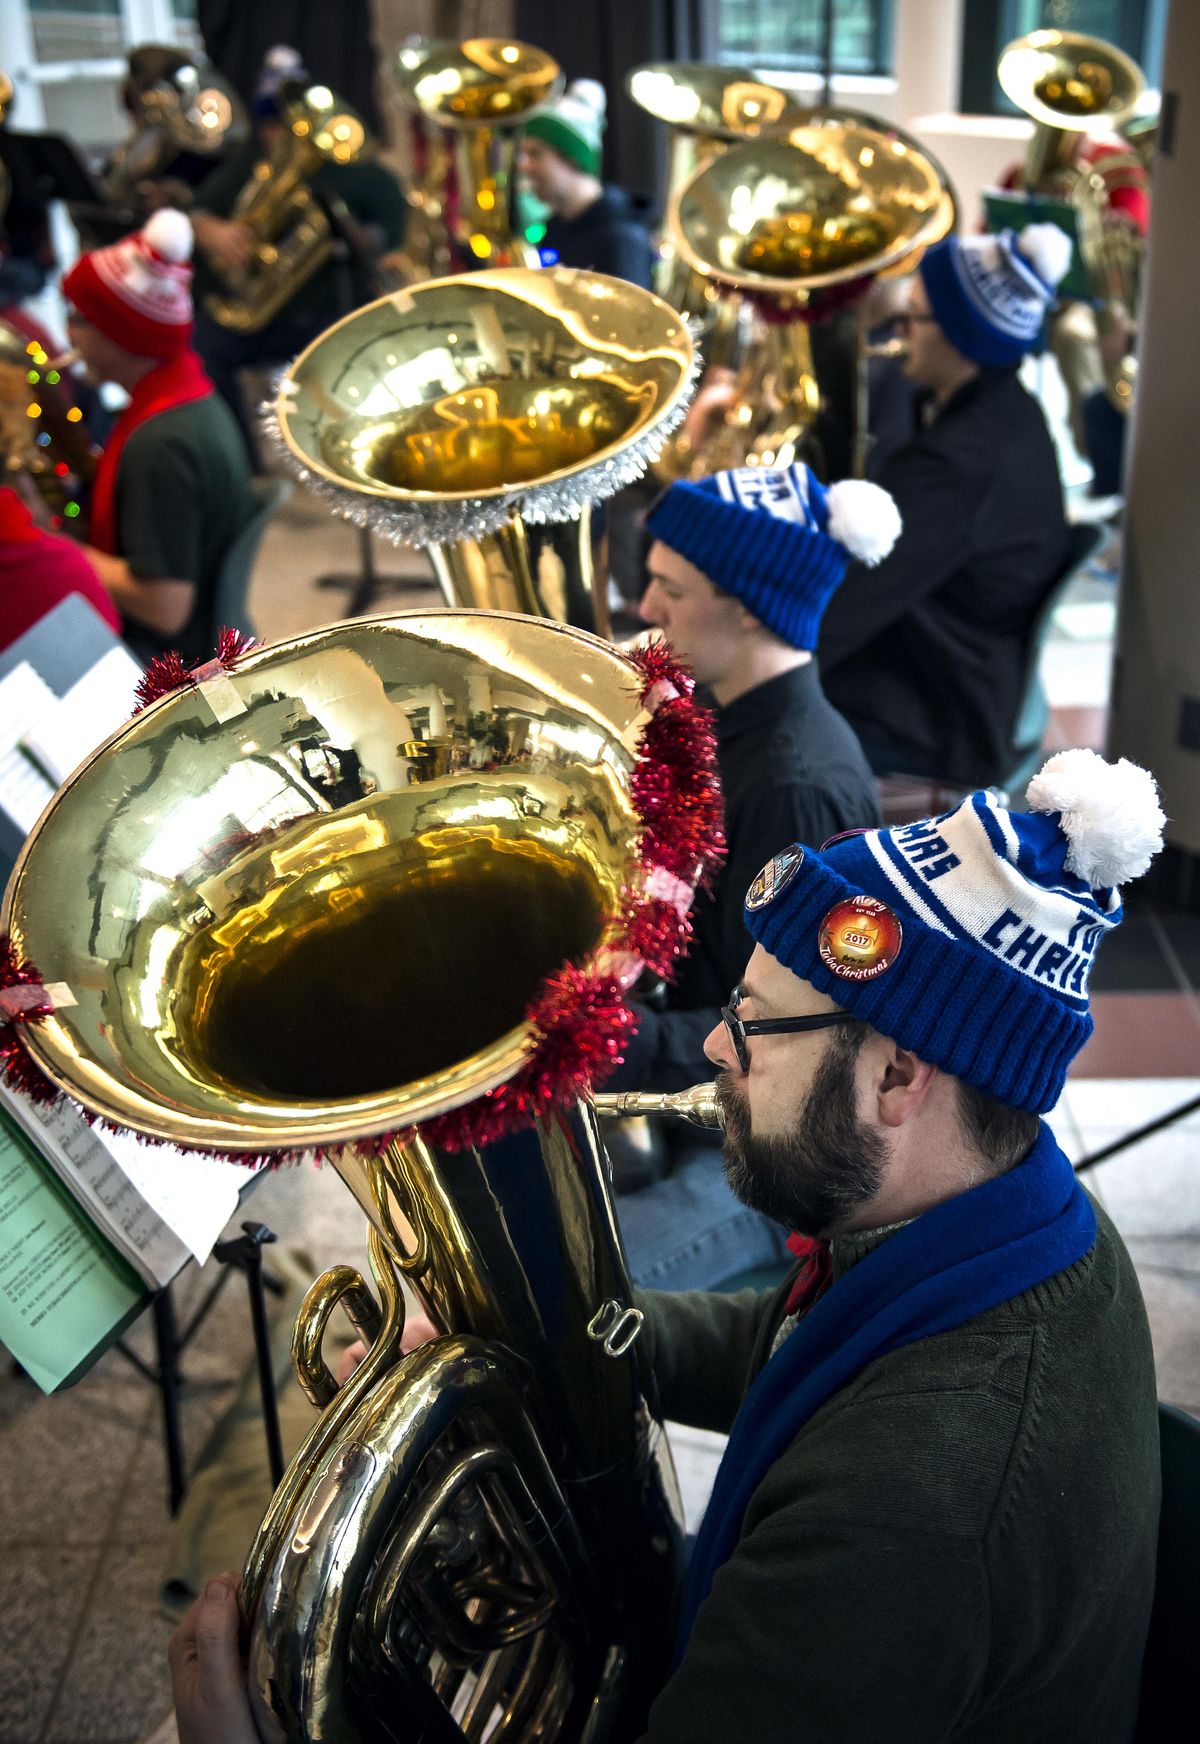 Jim Windisch, of Coeur dAlene, plays Christmas songs on his bass tuba during the Spokane TubaChristmas concert held Sat., Dec.9, 2017, in the STA Plaza. The concert, conducted by Vern Windham, featured over 40 tuba and euphonium players. (Colin Mulvany / The Spokesman-Review)